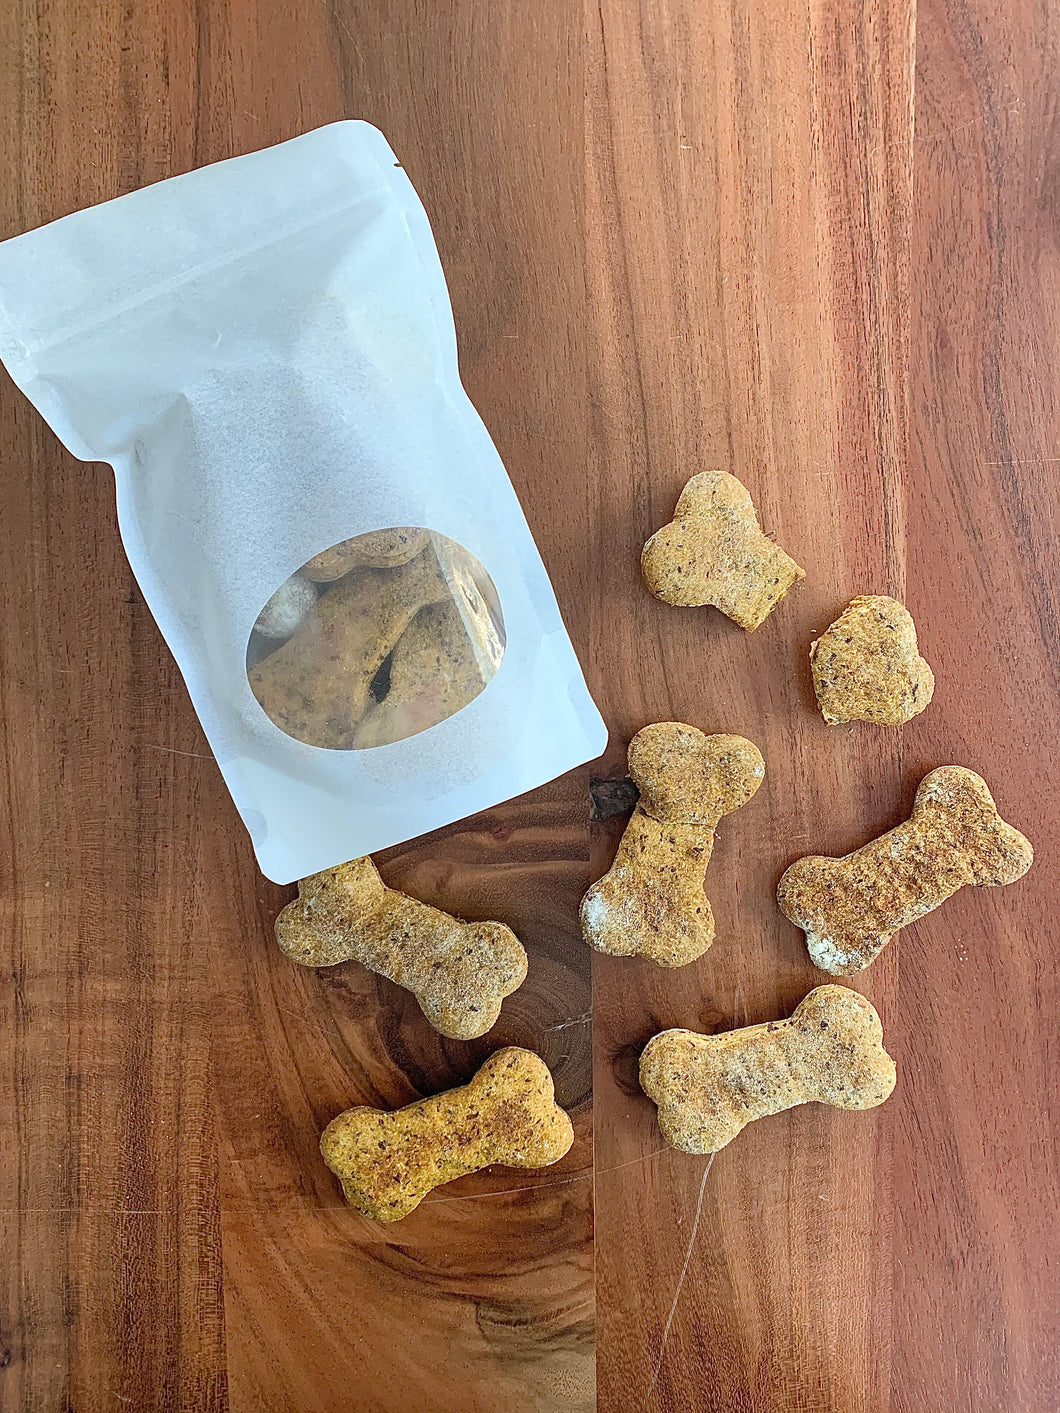 Homemade Treats from our Barkery